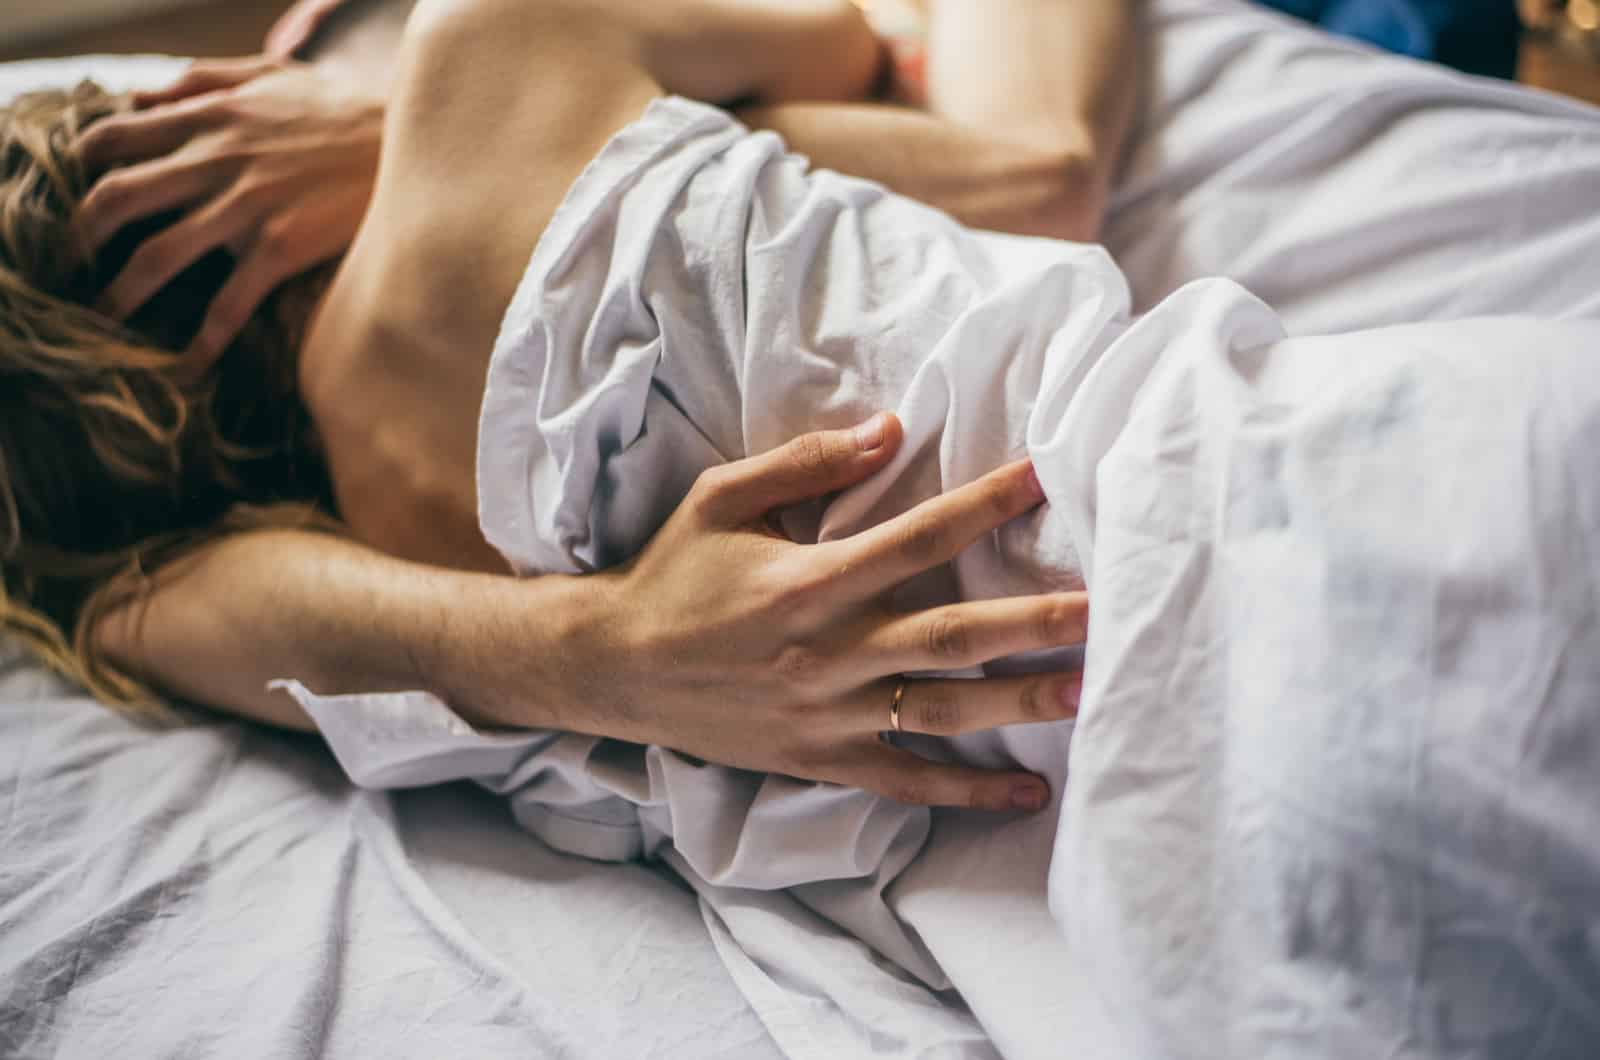 How To Become More Active In Bed As A Woman: 10 Tips